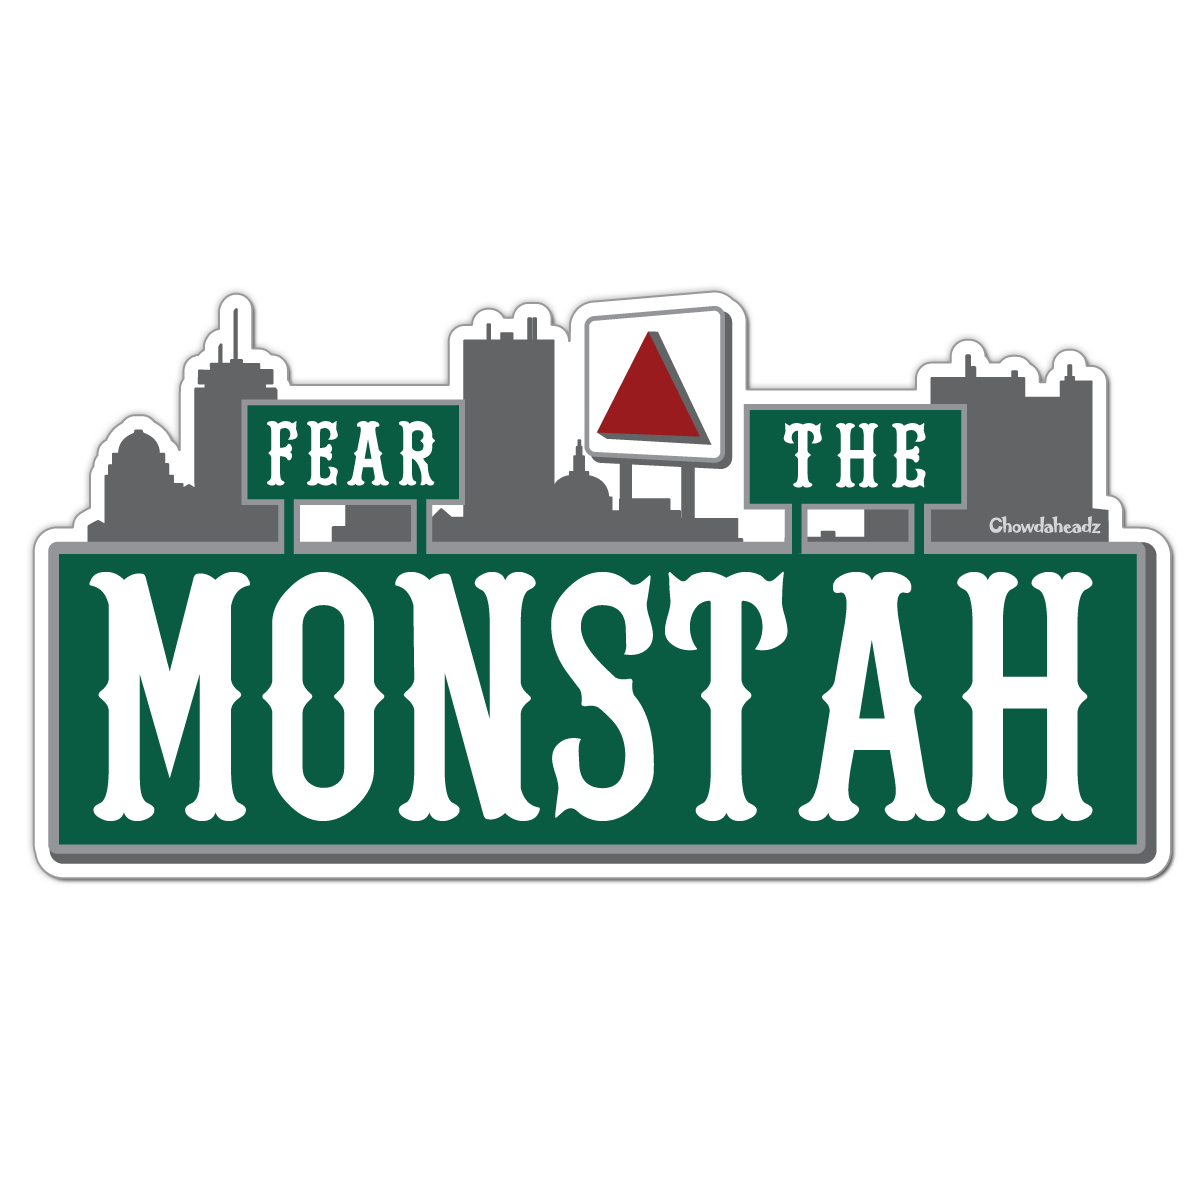 Boston Red Sox Fear The Green Monster Shirt